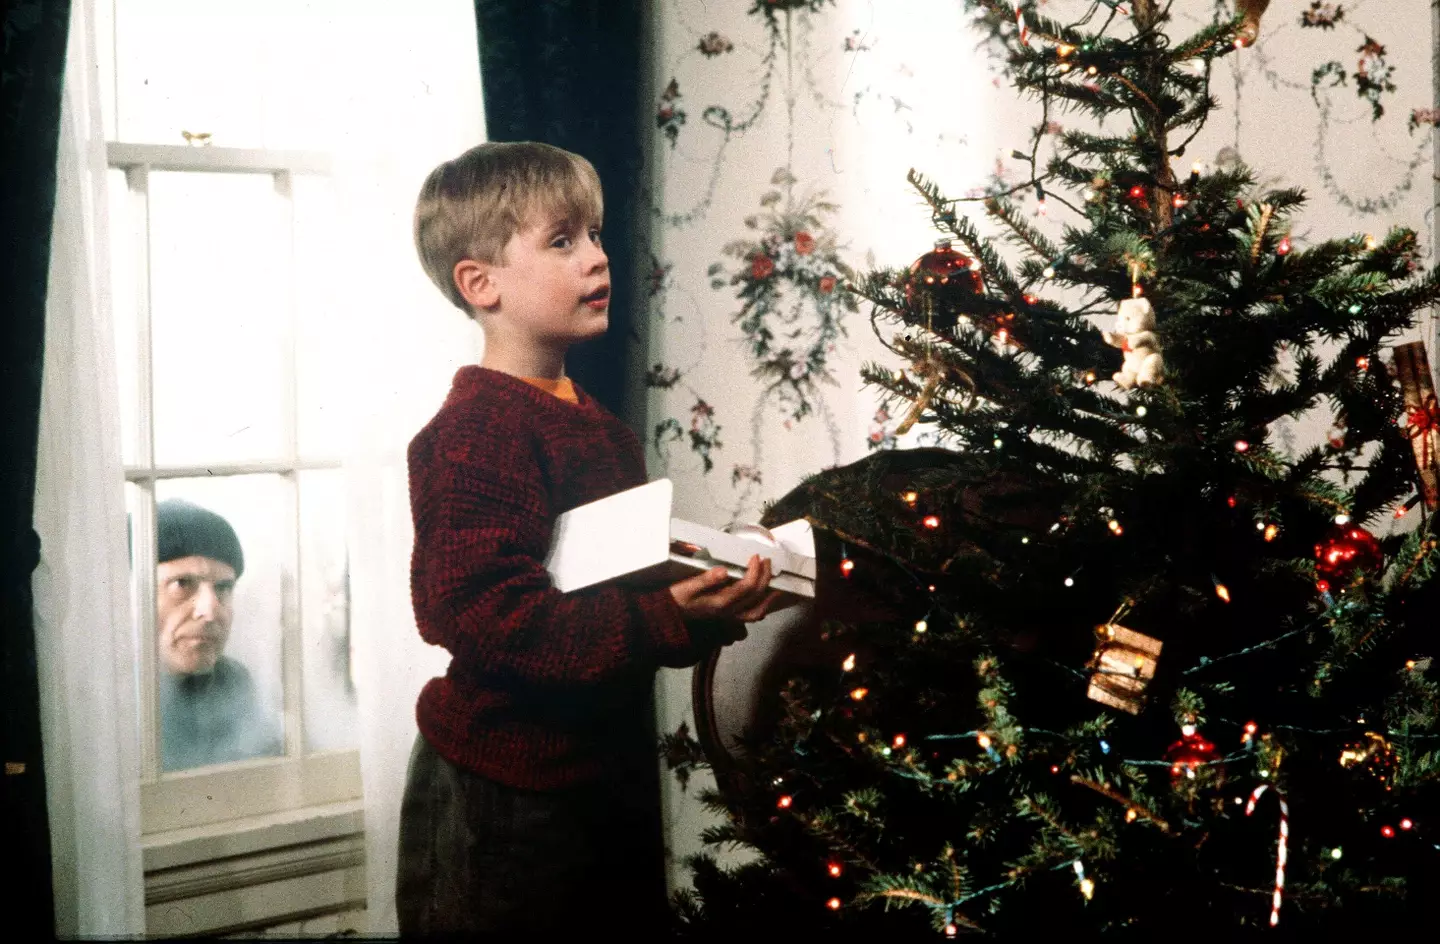 You could be recreating one of your fave Christmas movies at this AirBnB (